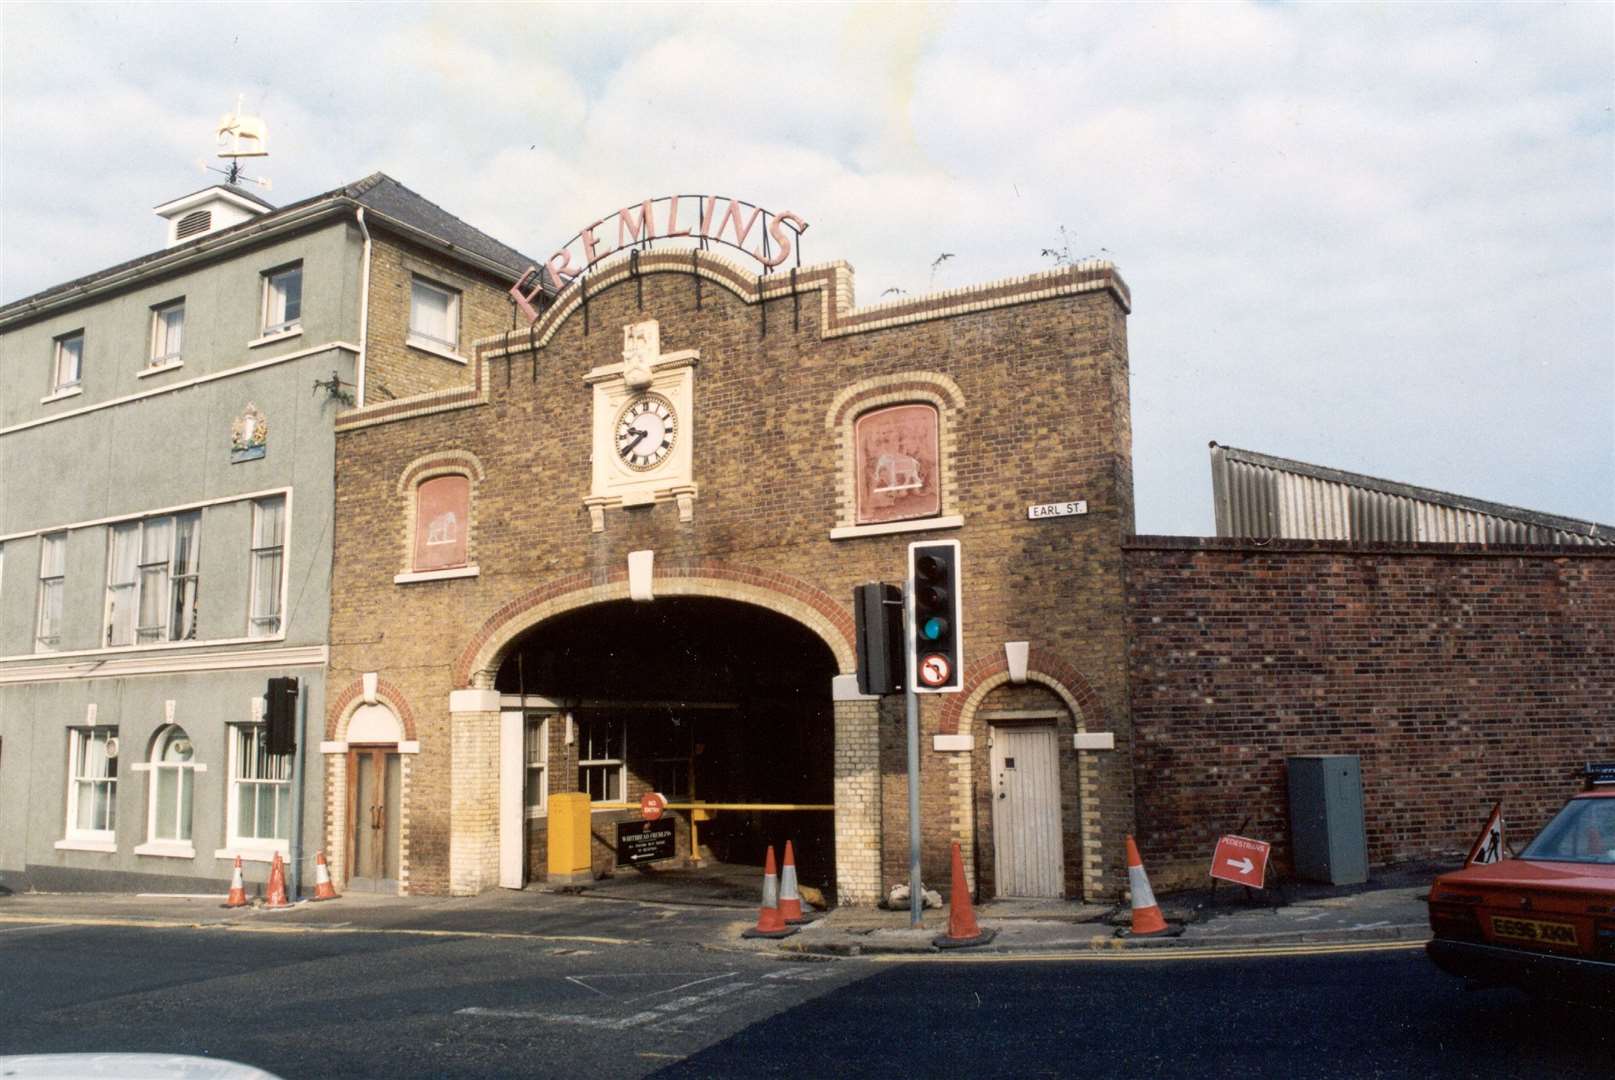 Fremlin was once a brewery, pictured here in 1995